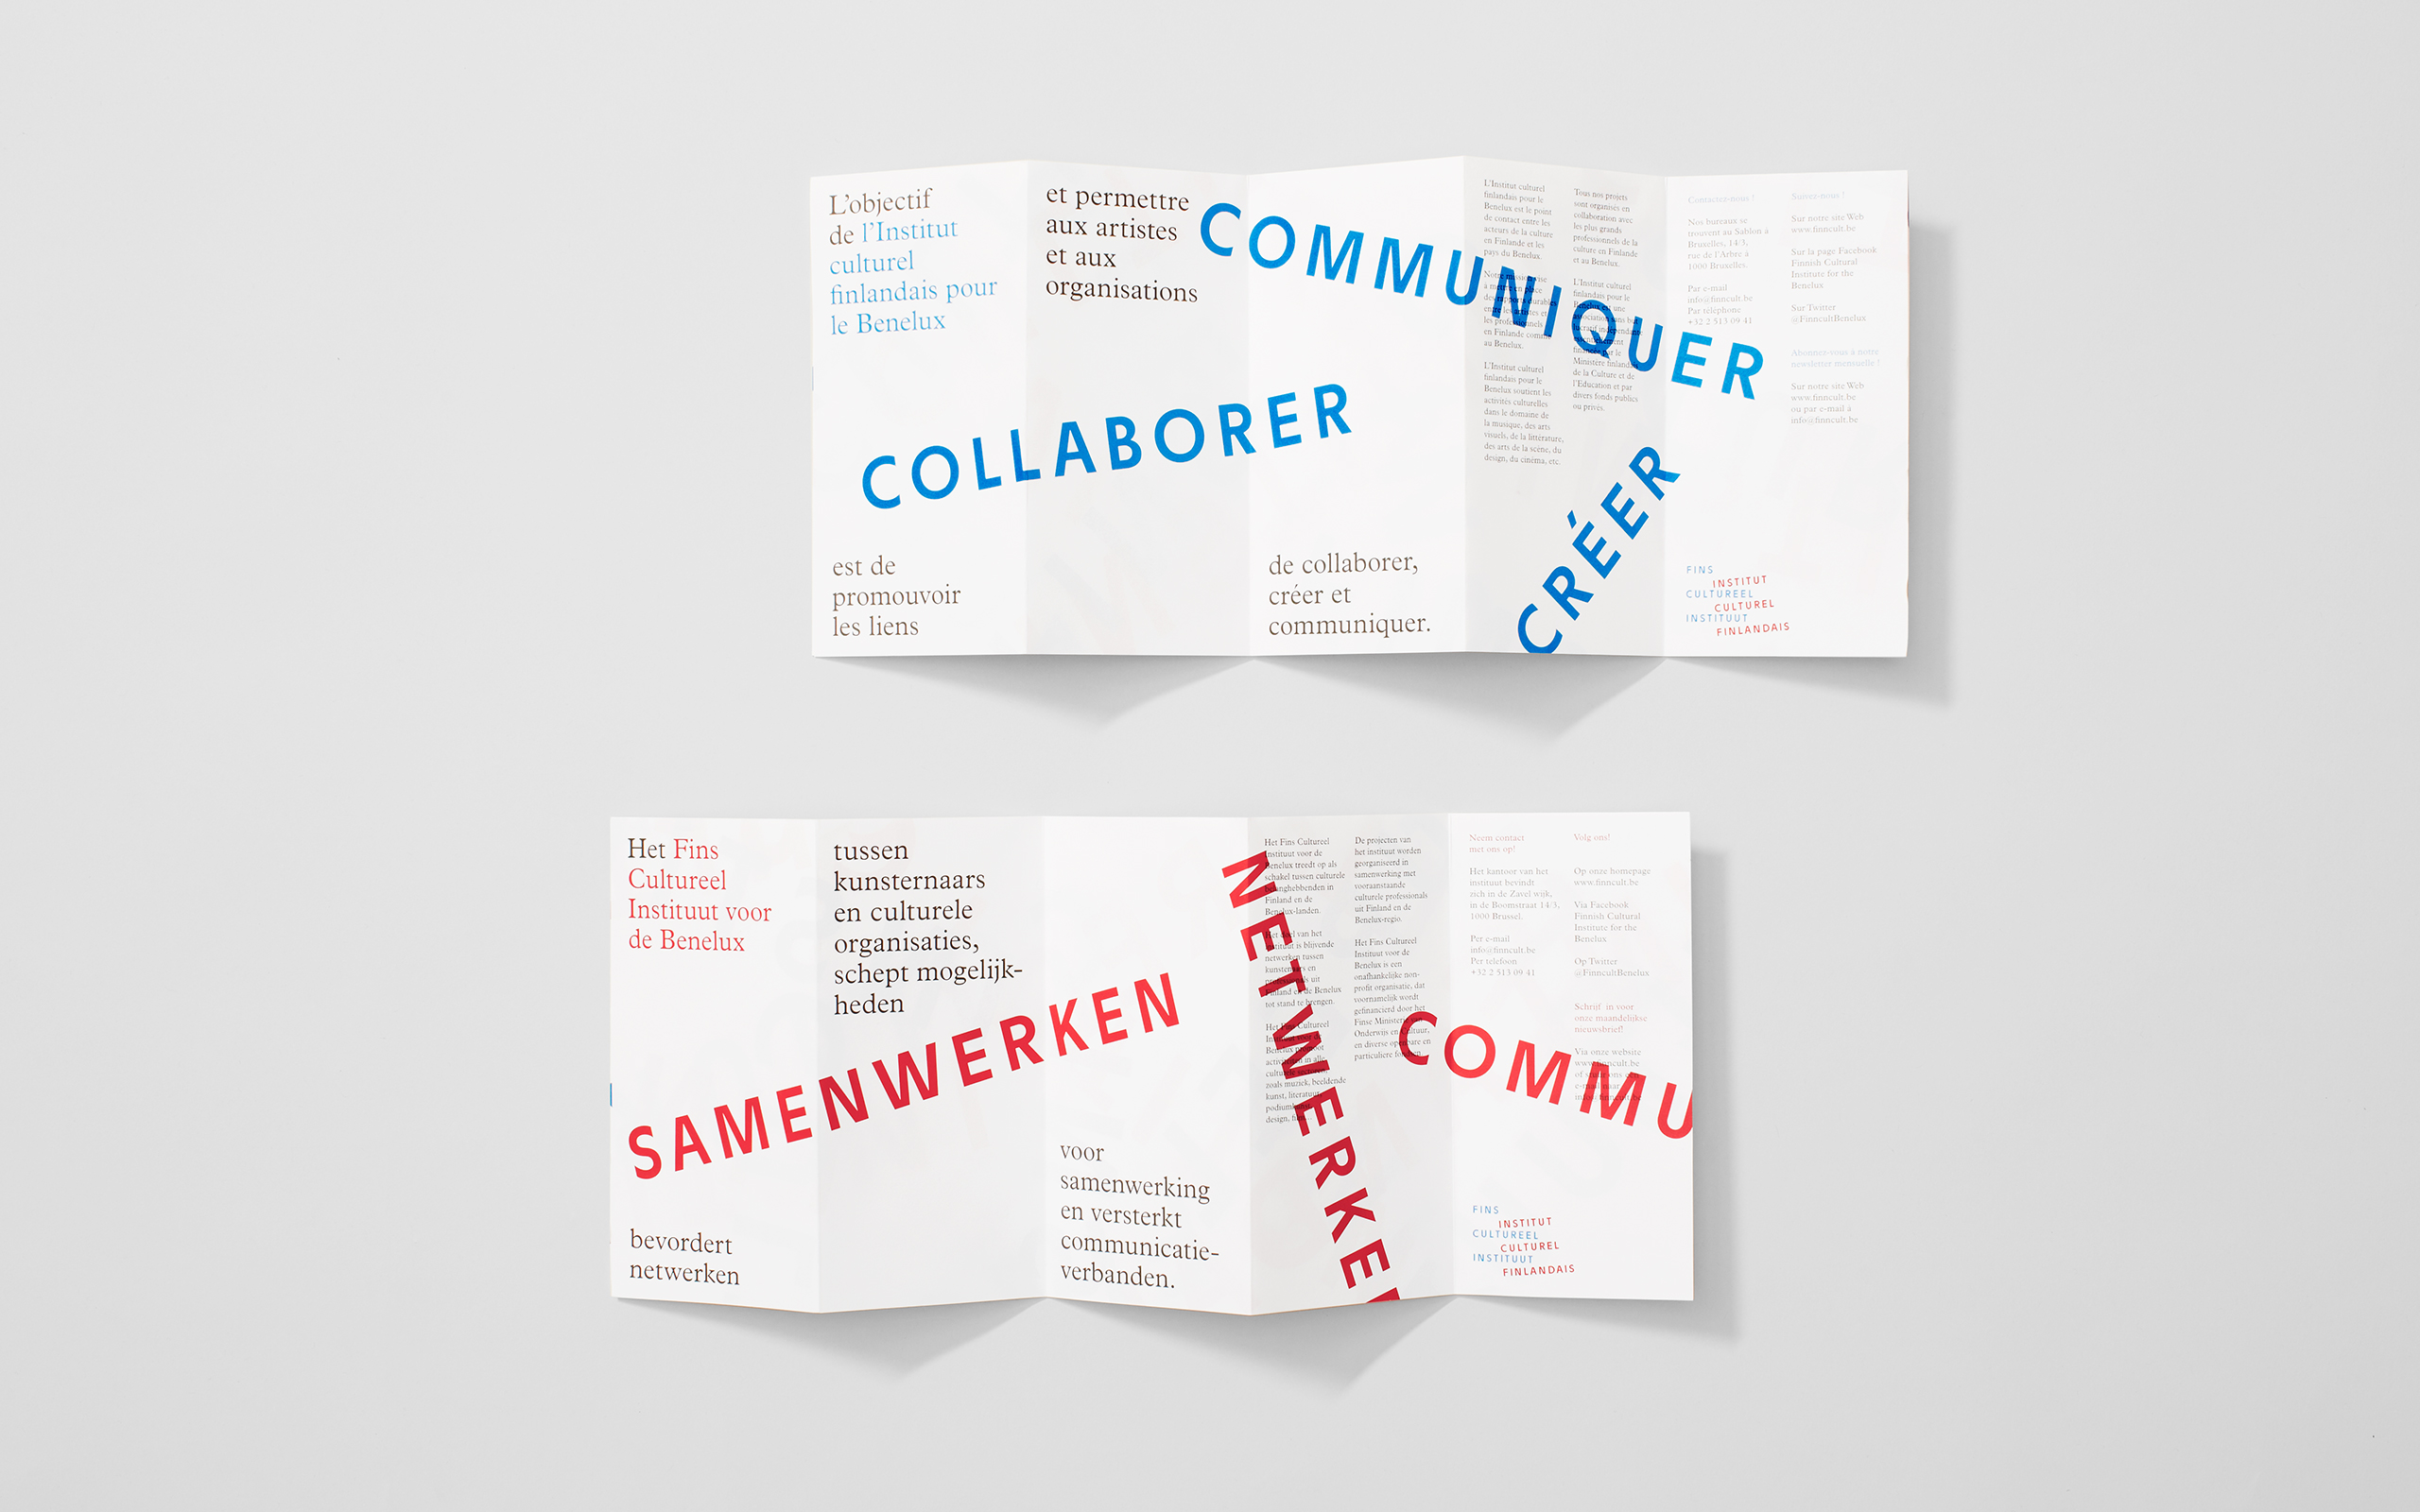 Logo and print with red and blue ink overprint detail designed by Kokoro & Moi for The Finnish Cultural Institute for the Benelux